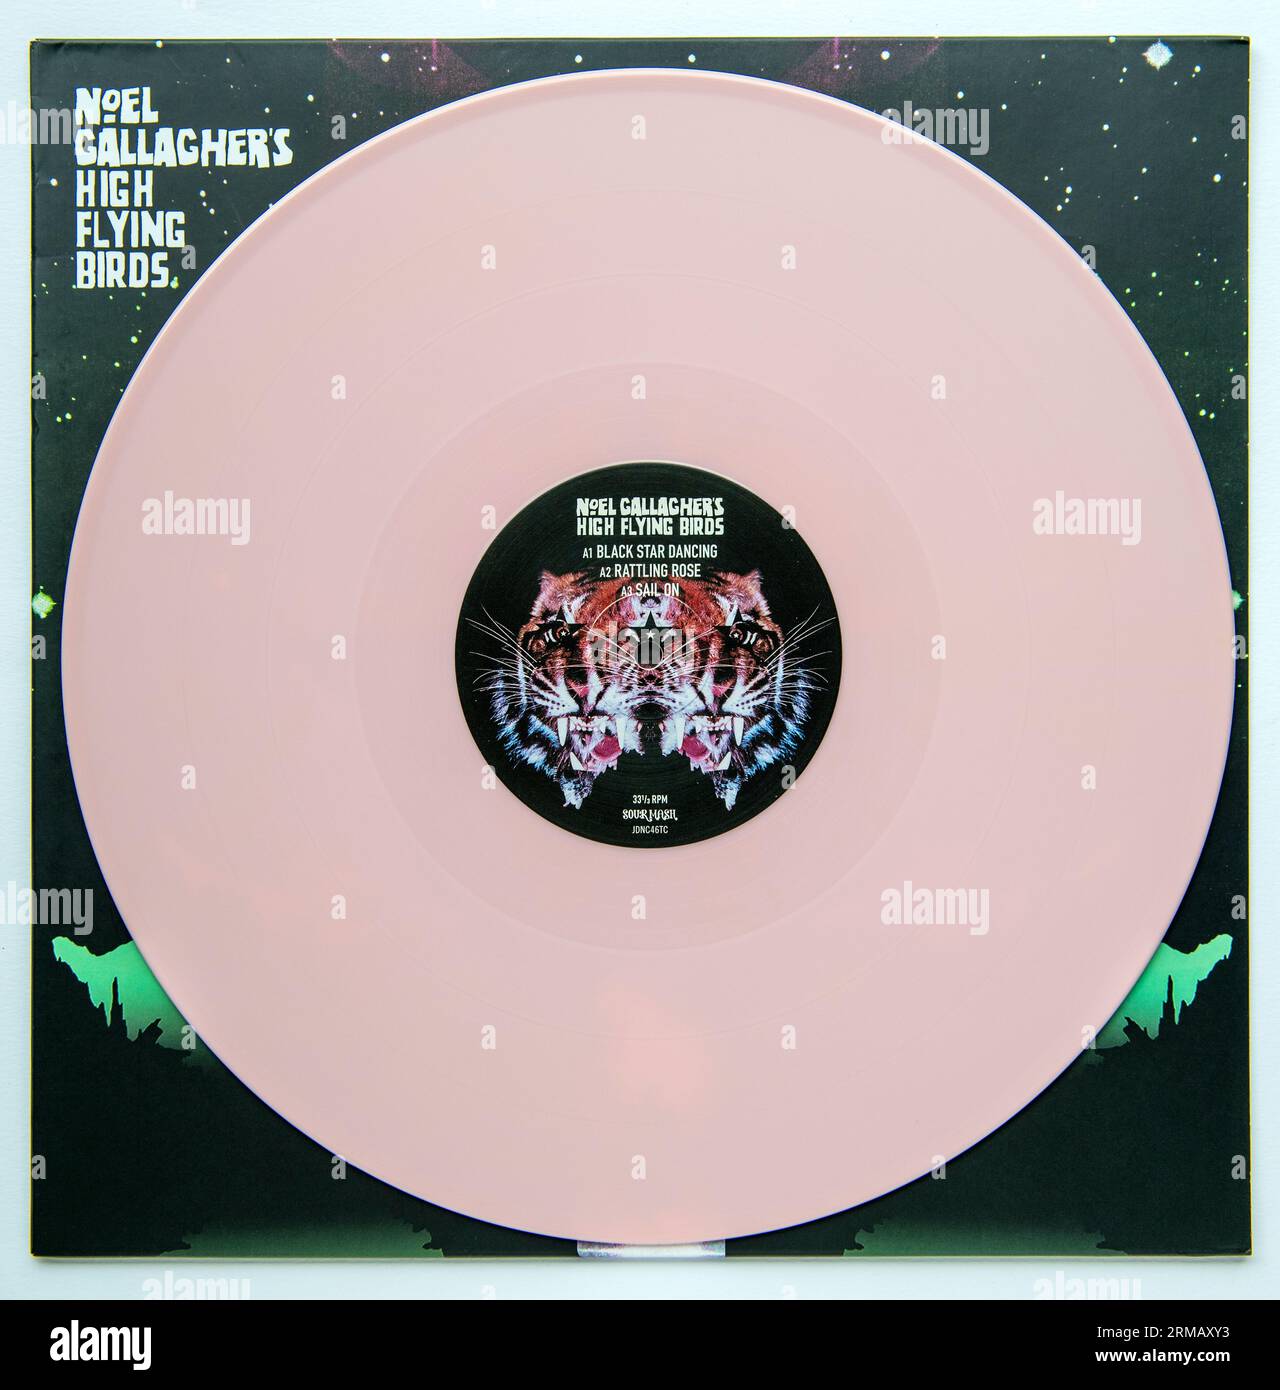 Pink vinyl 12 inch single version of Black Star Dancing by Noel Gallagher's High Flying Birds, which was released in 2019 Stock Photo